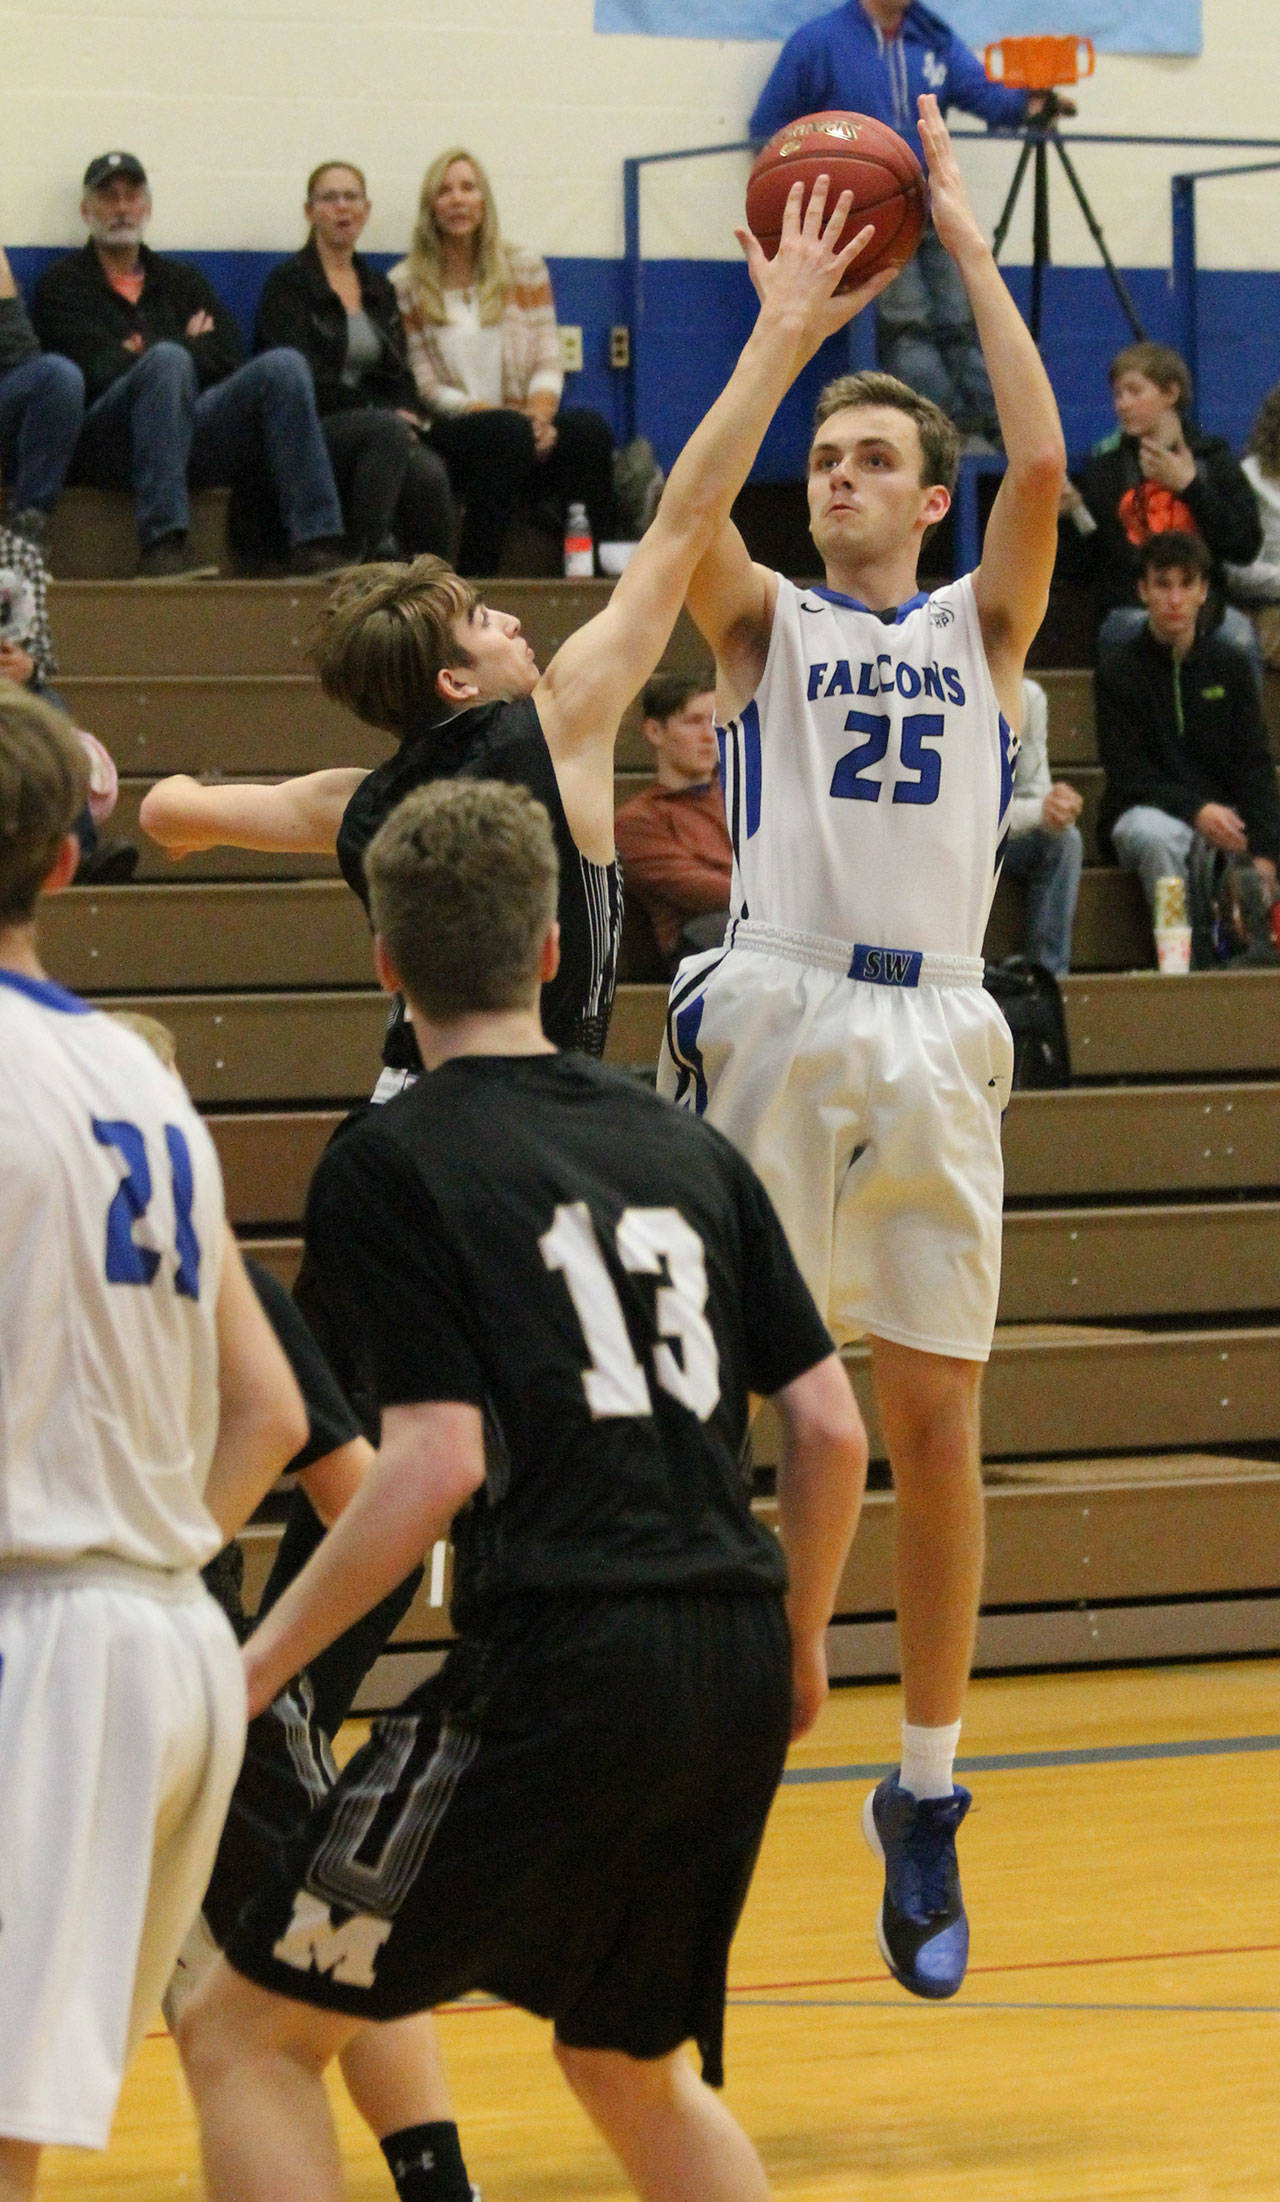 Levi Buck puts up a jumper in Tuesday’s game. (Photo by Jim Waller/South Whidbey Record)